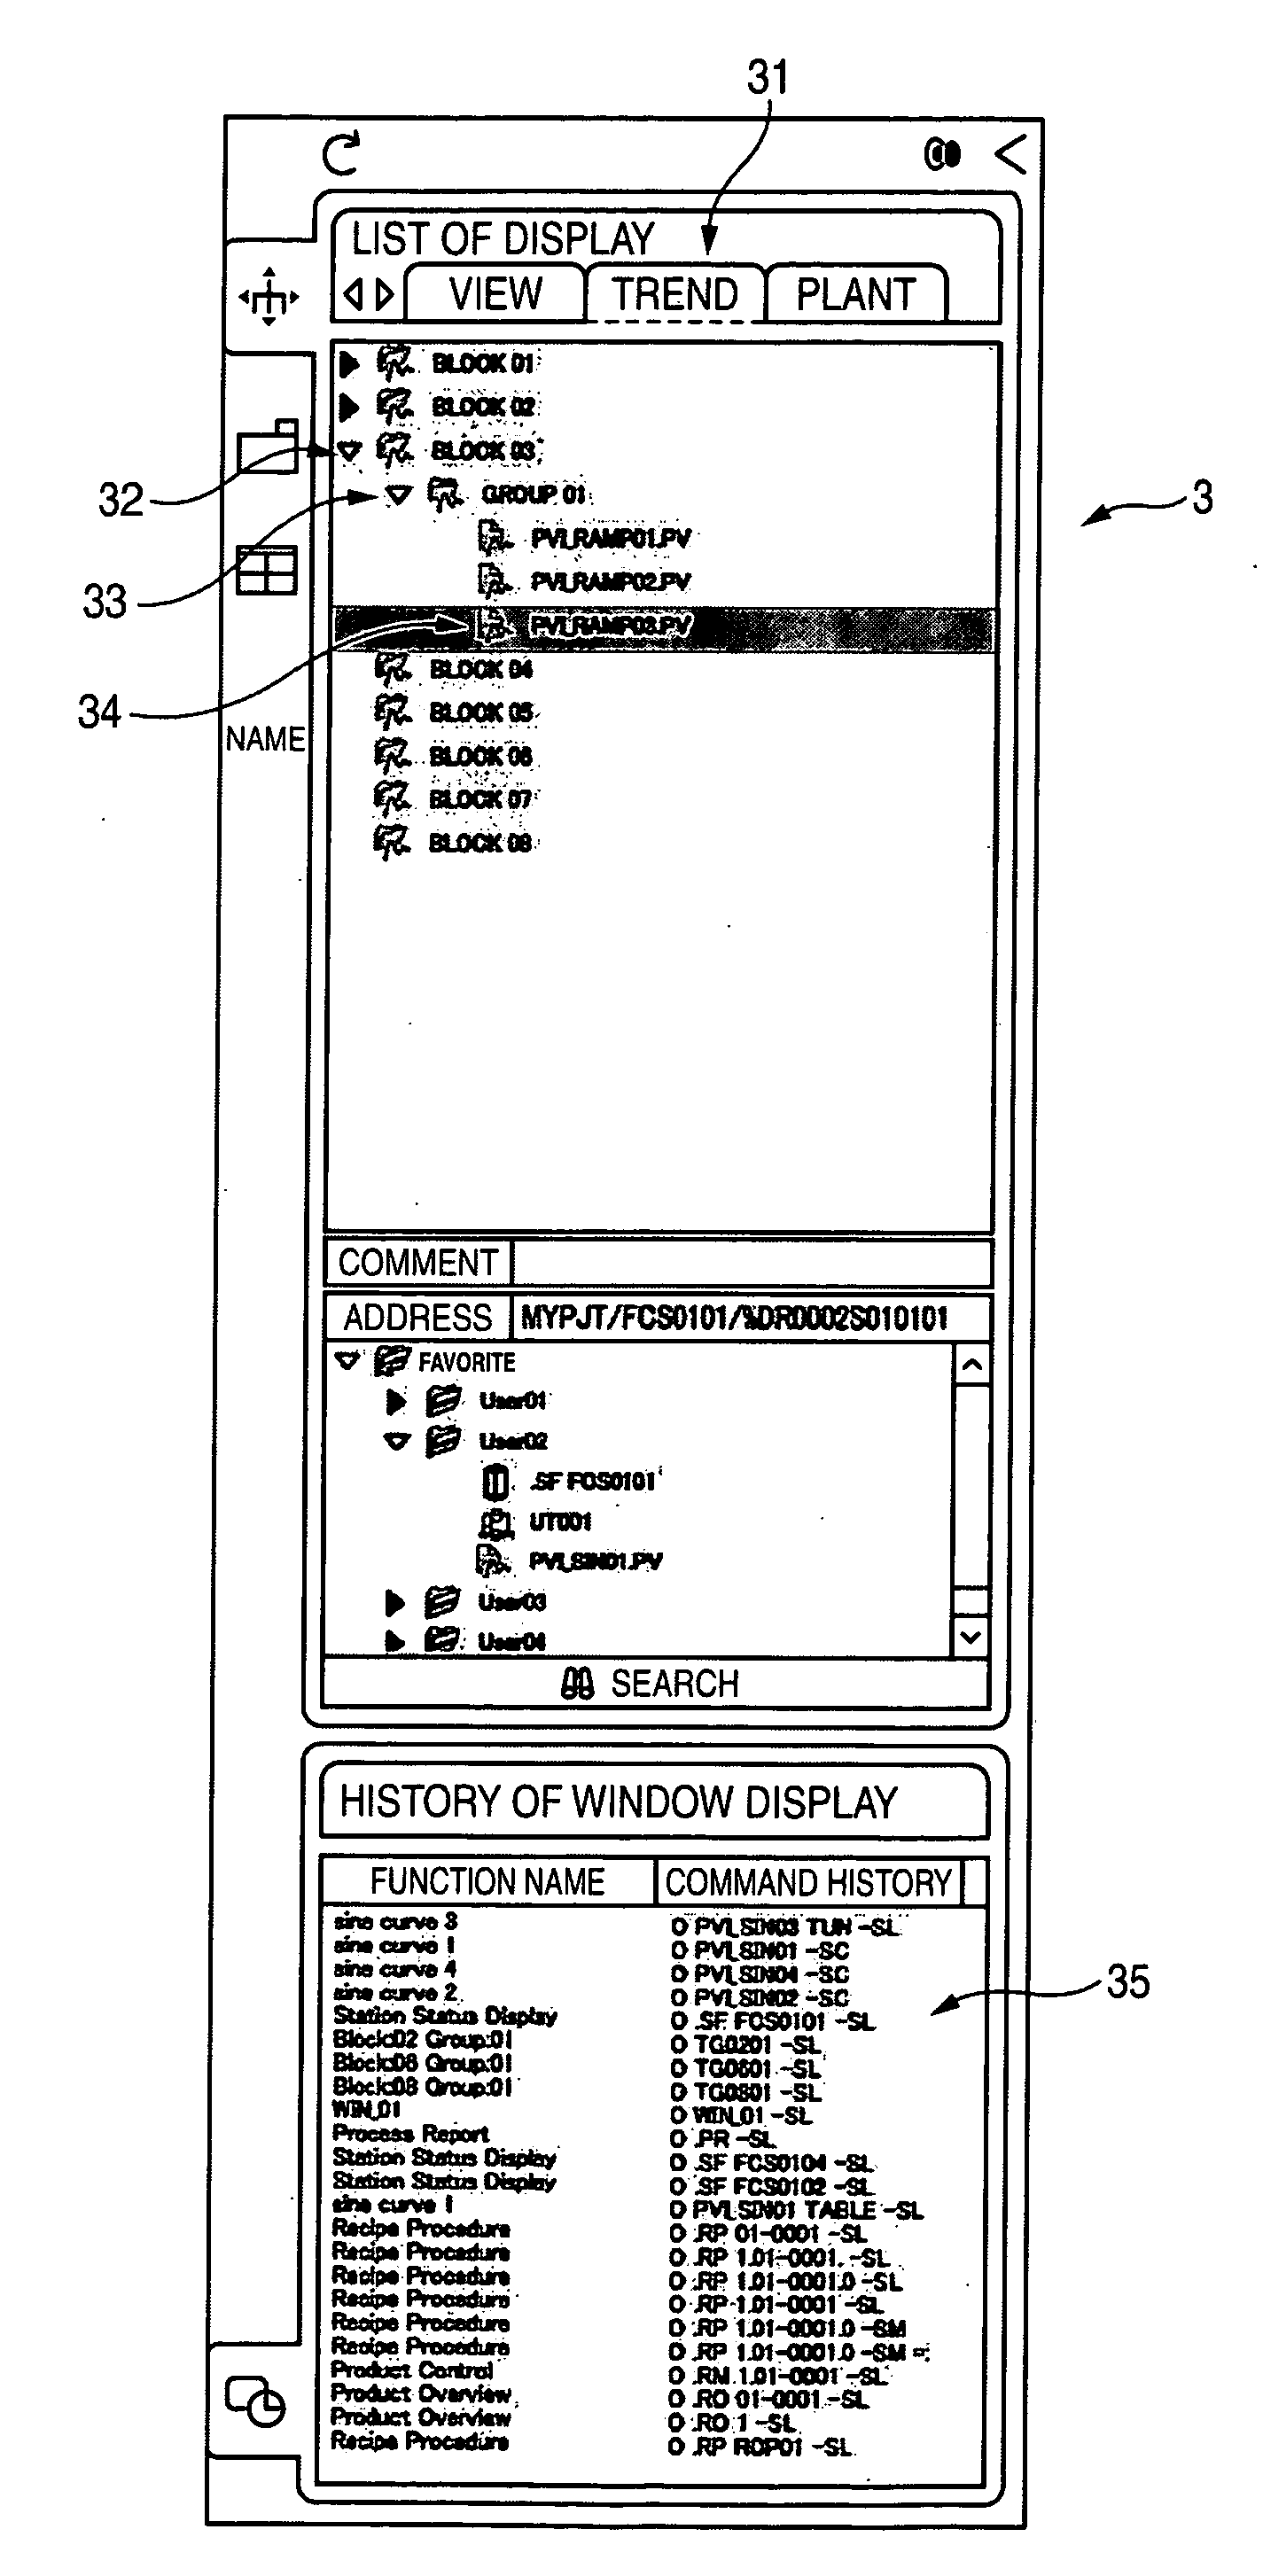 Plant information display apparatus and method